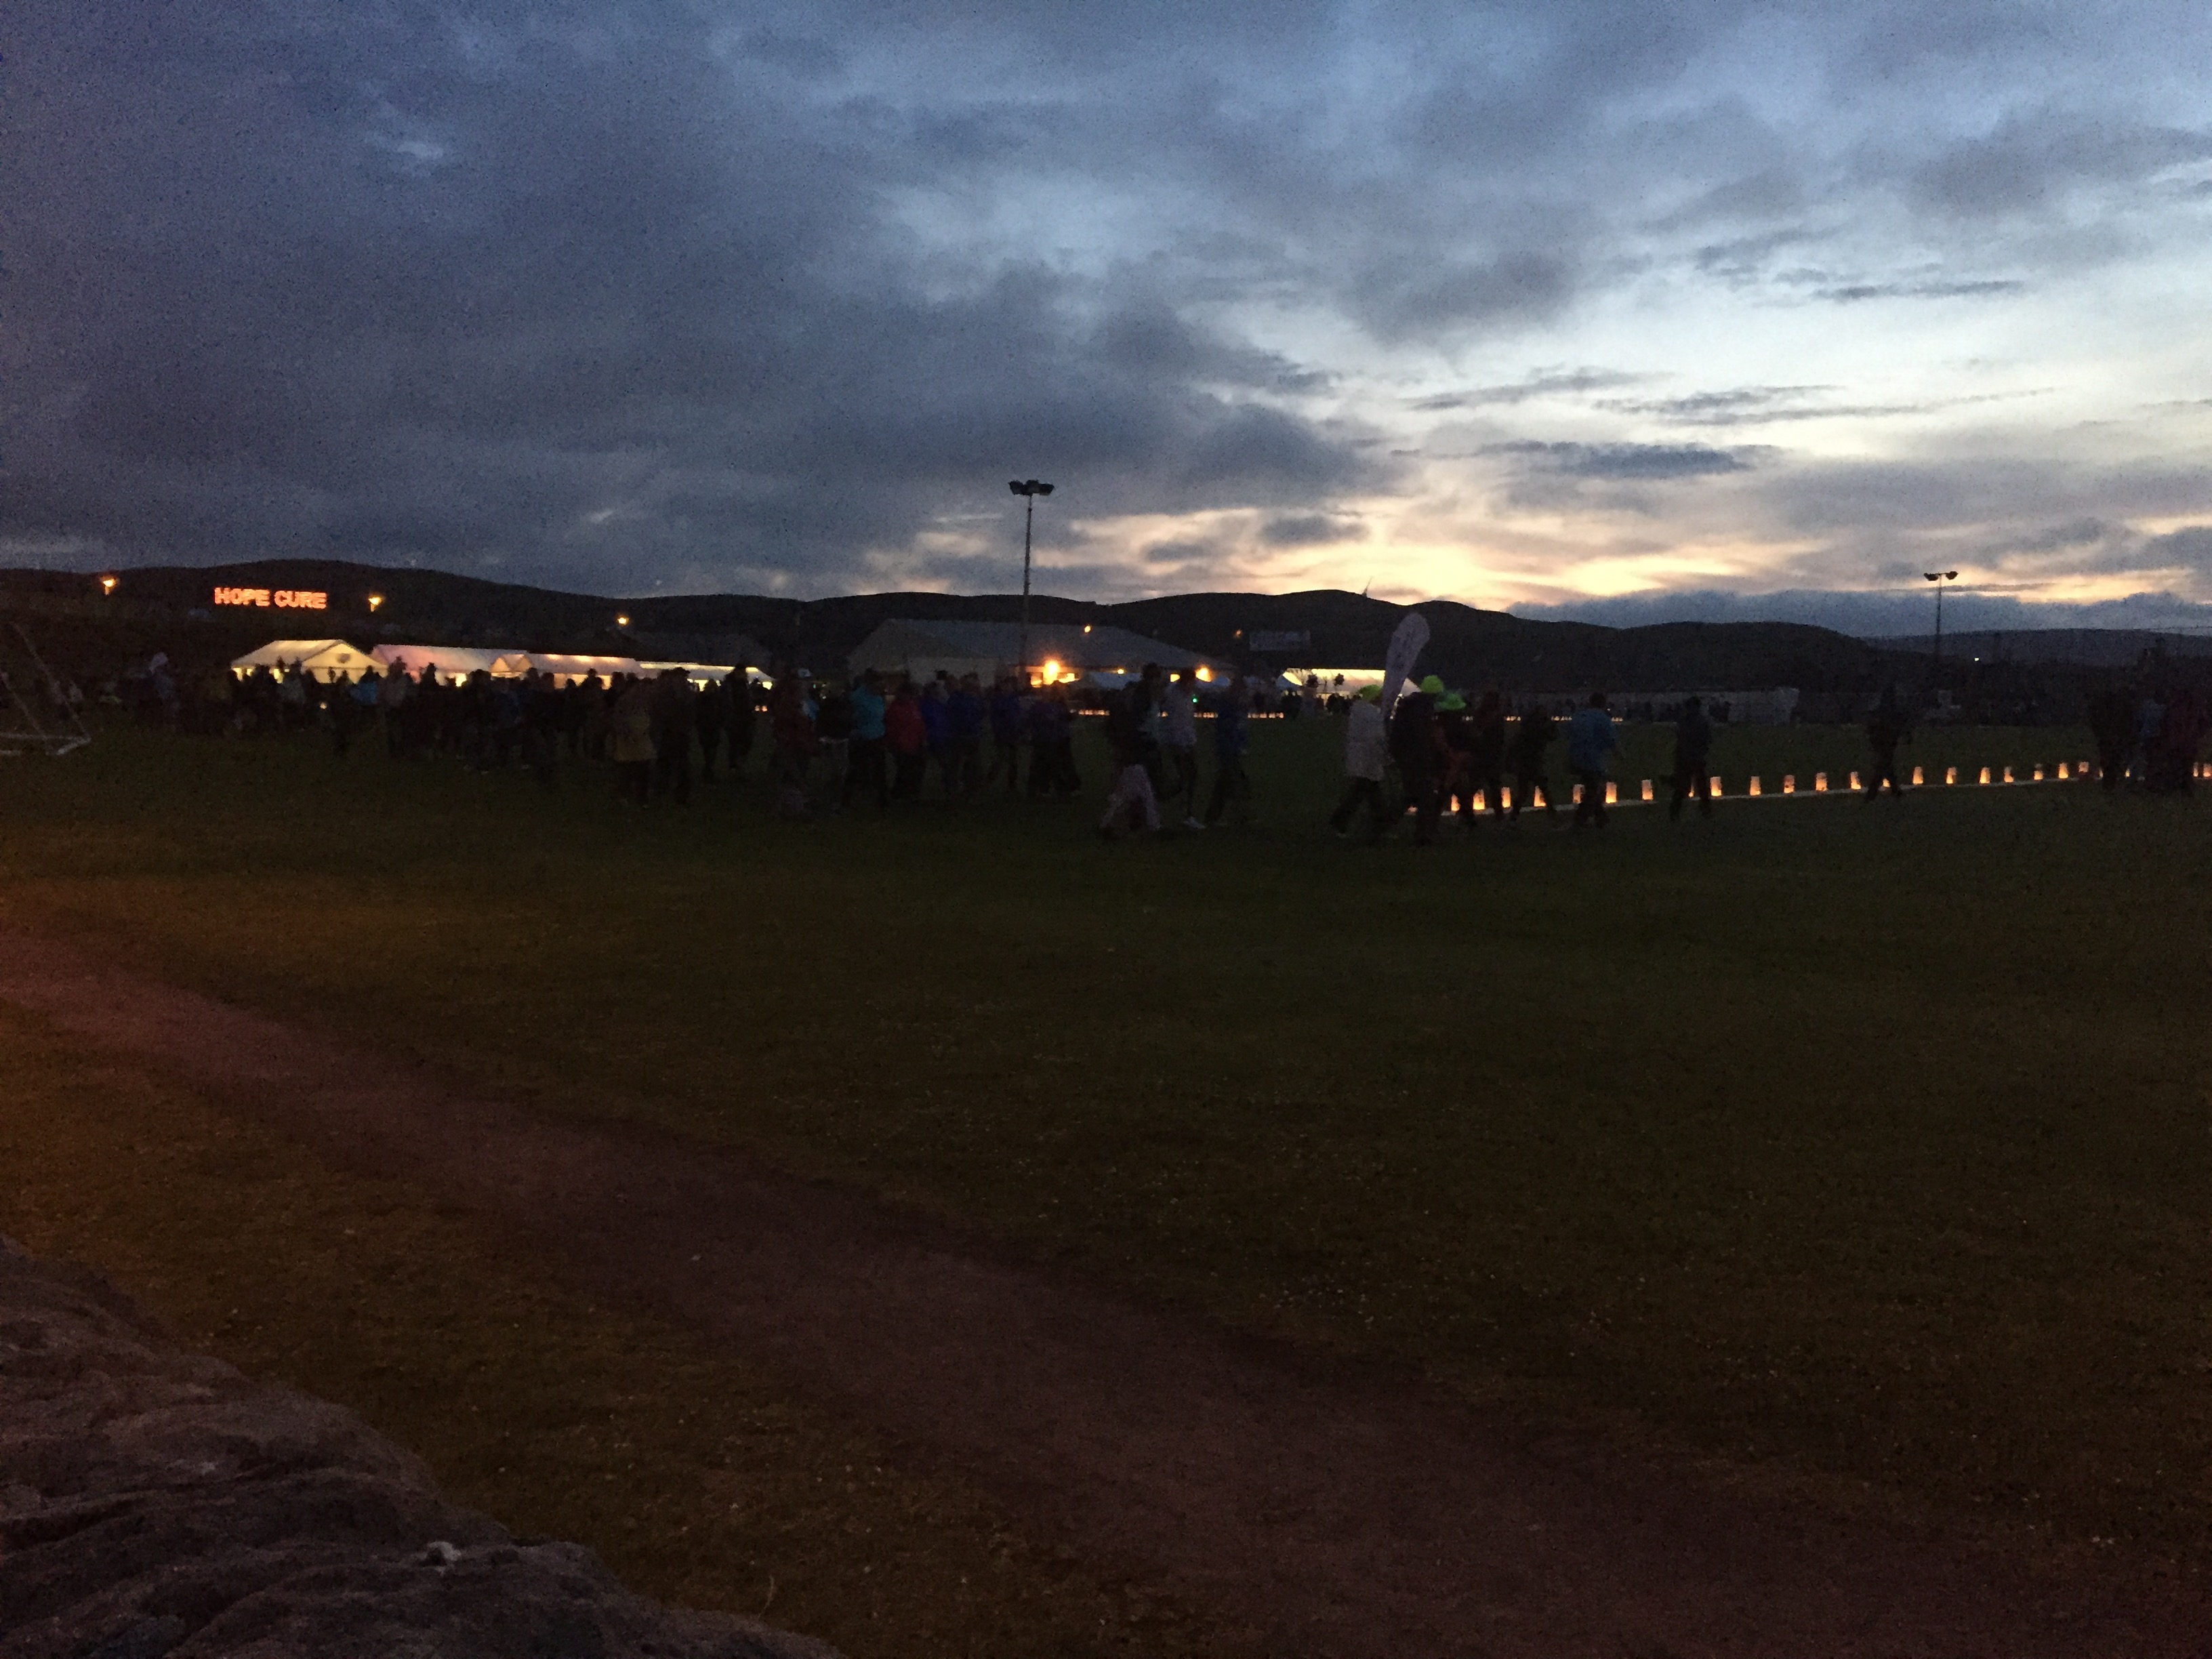 'Hope' and 'Cure' illuminated on the hillside as walkers carry on through the night.